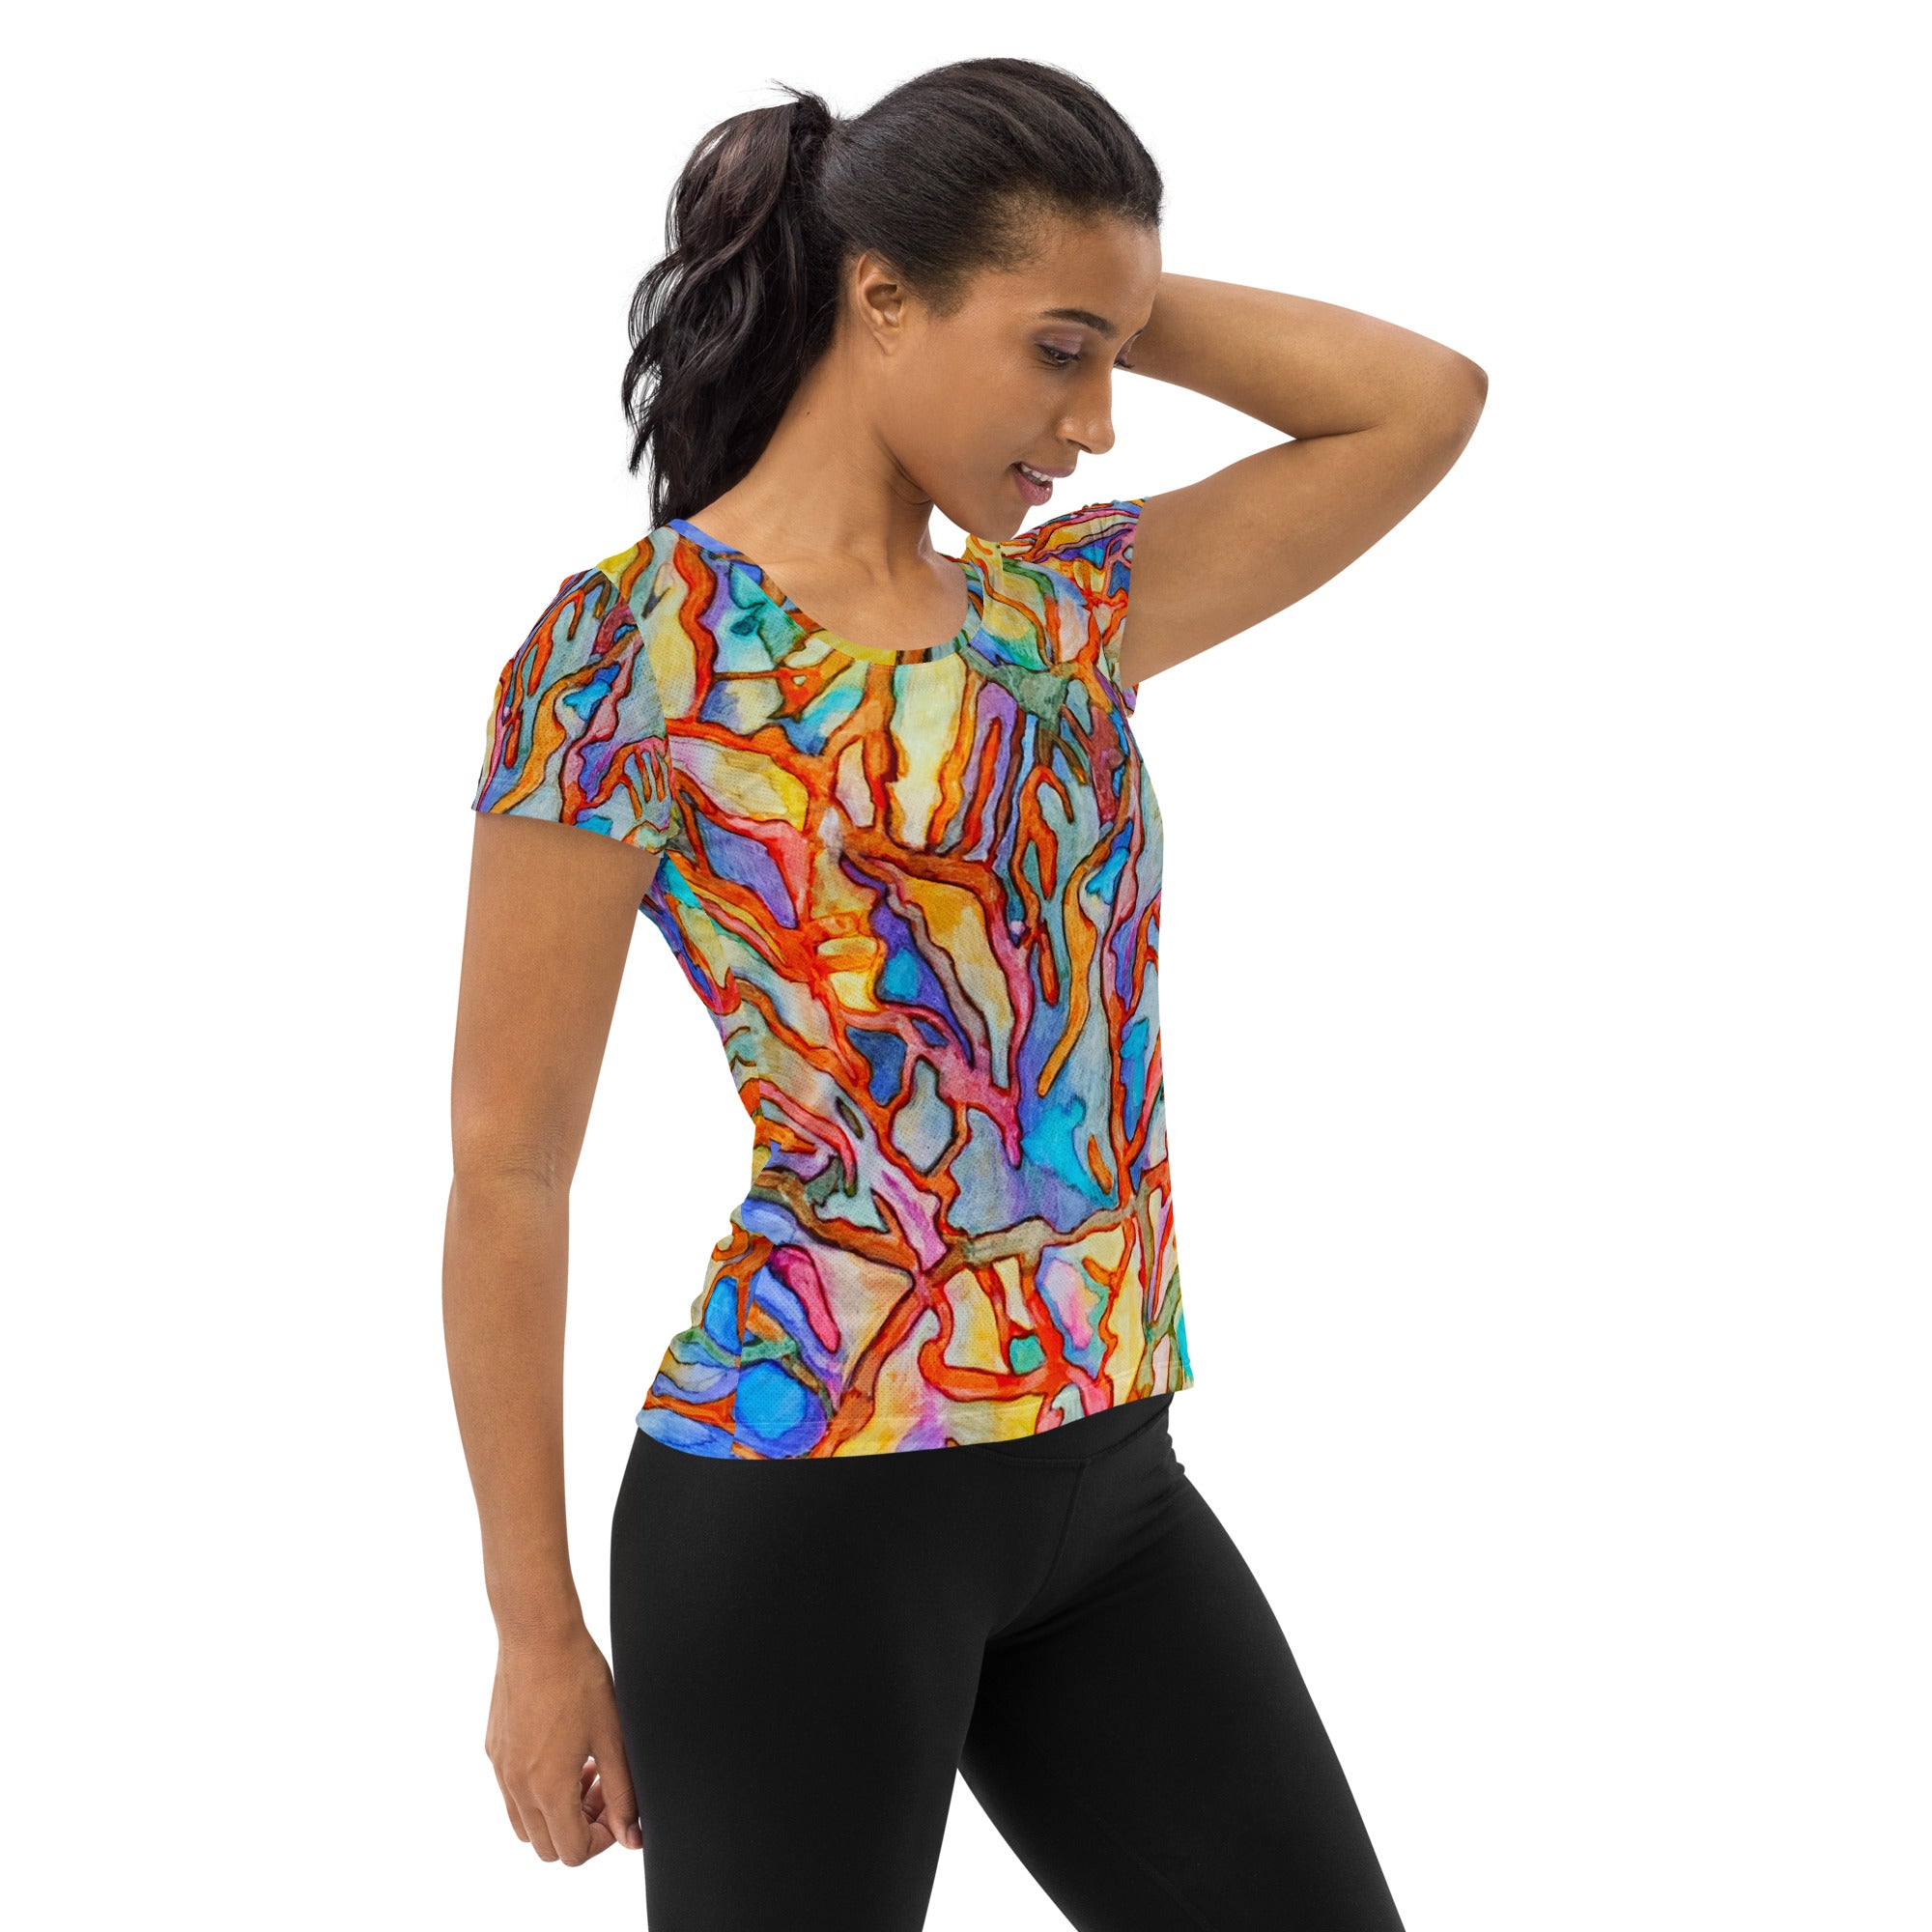 Coral Reef Women's Athletic T-shirt